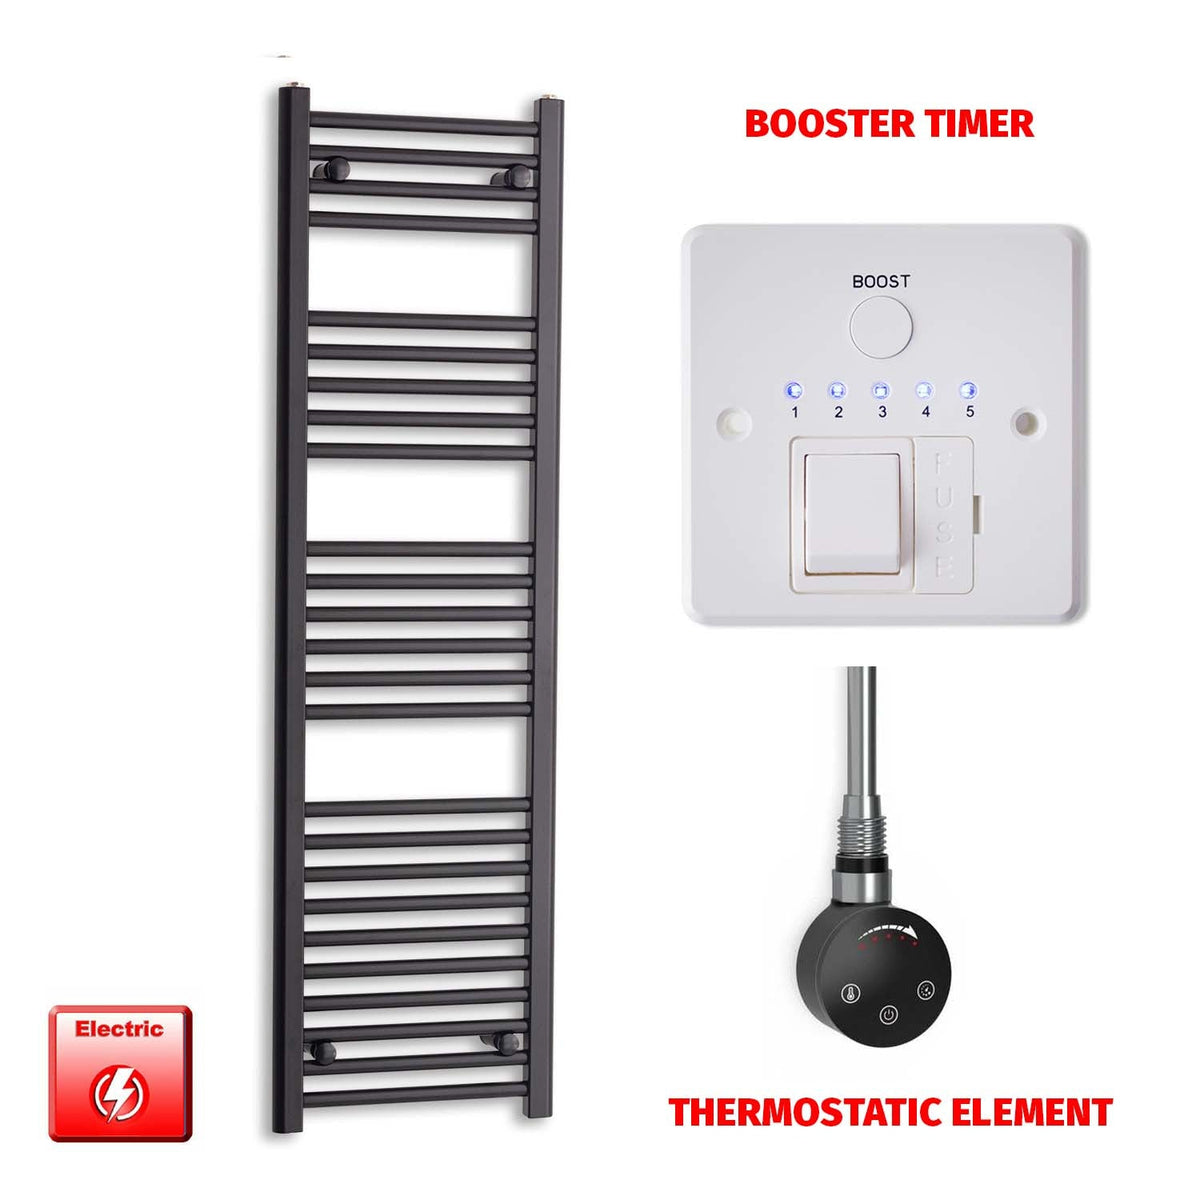 1400 x 400 Flat Black Pre-Filled Electric Heated Towel Radiator HTR Smart Thermostatic Booster Timer